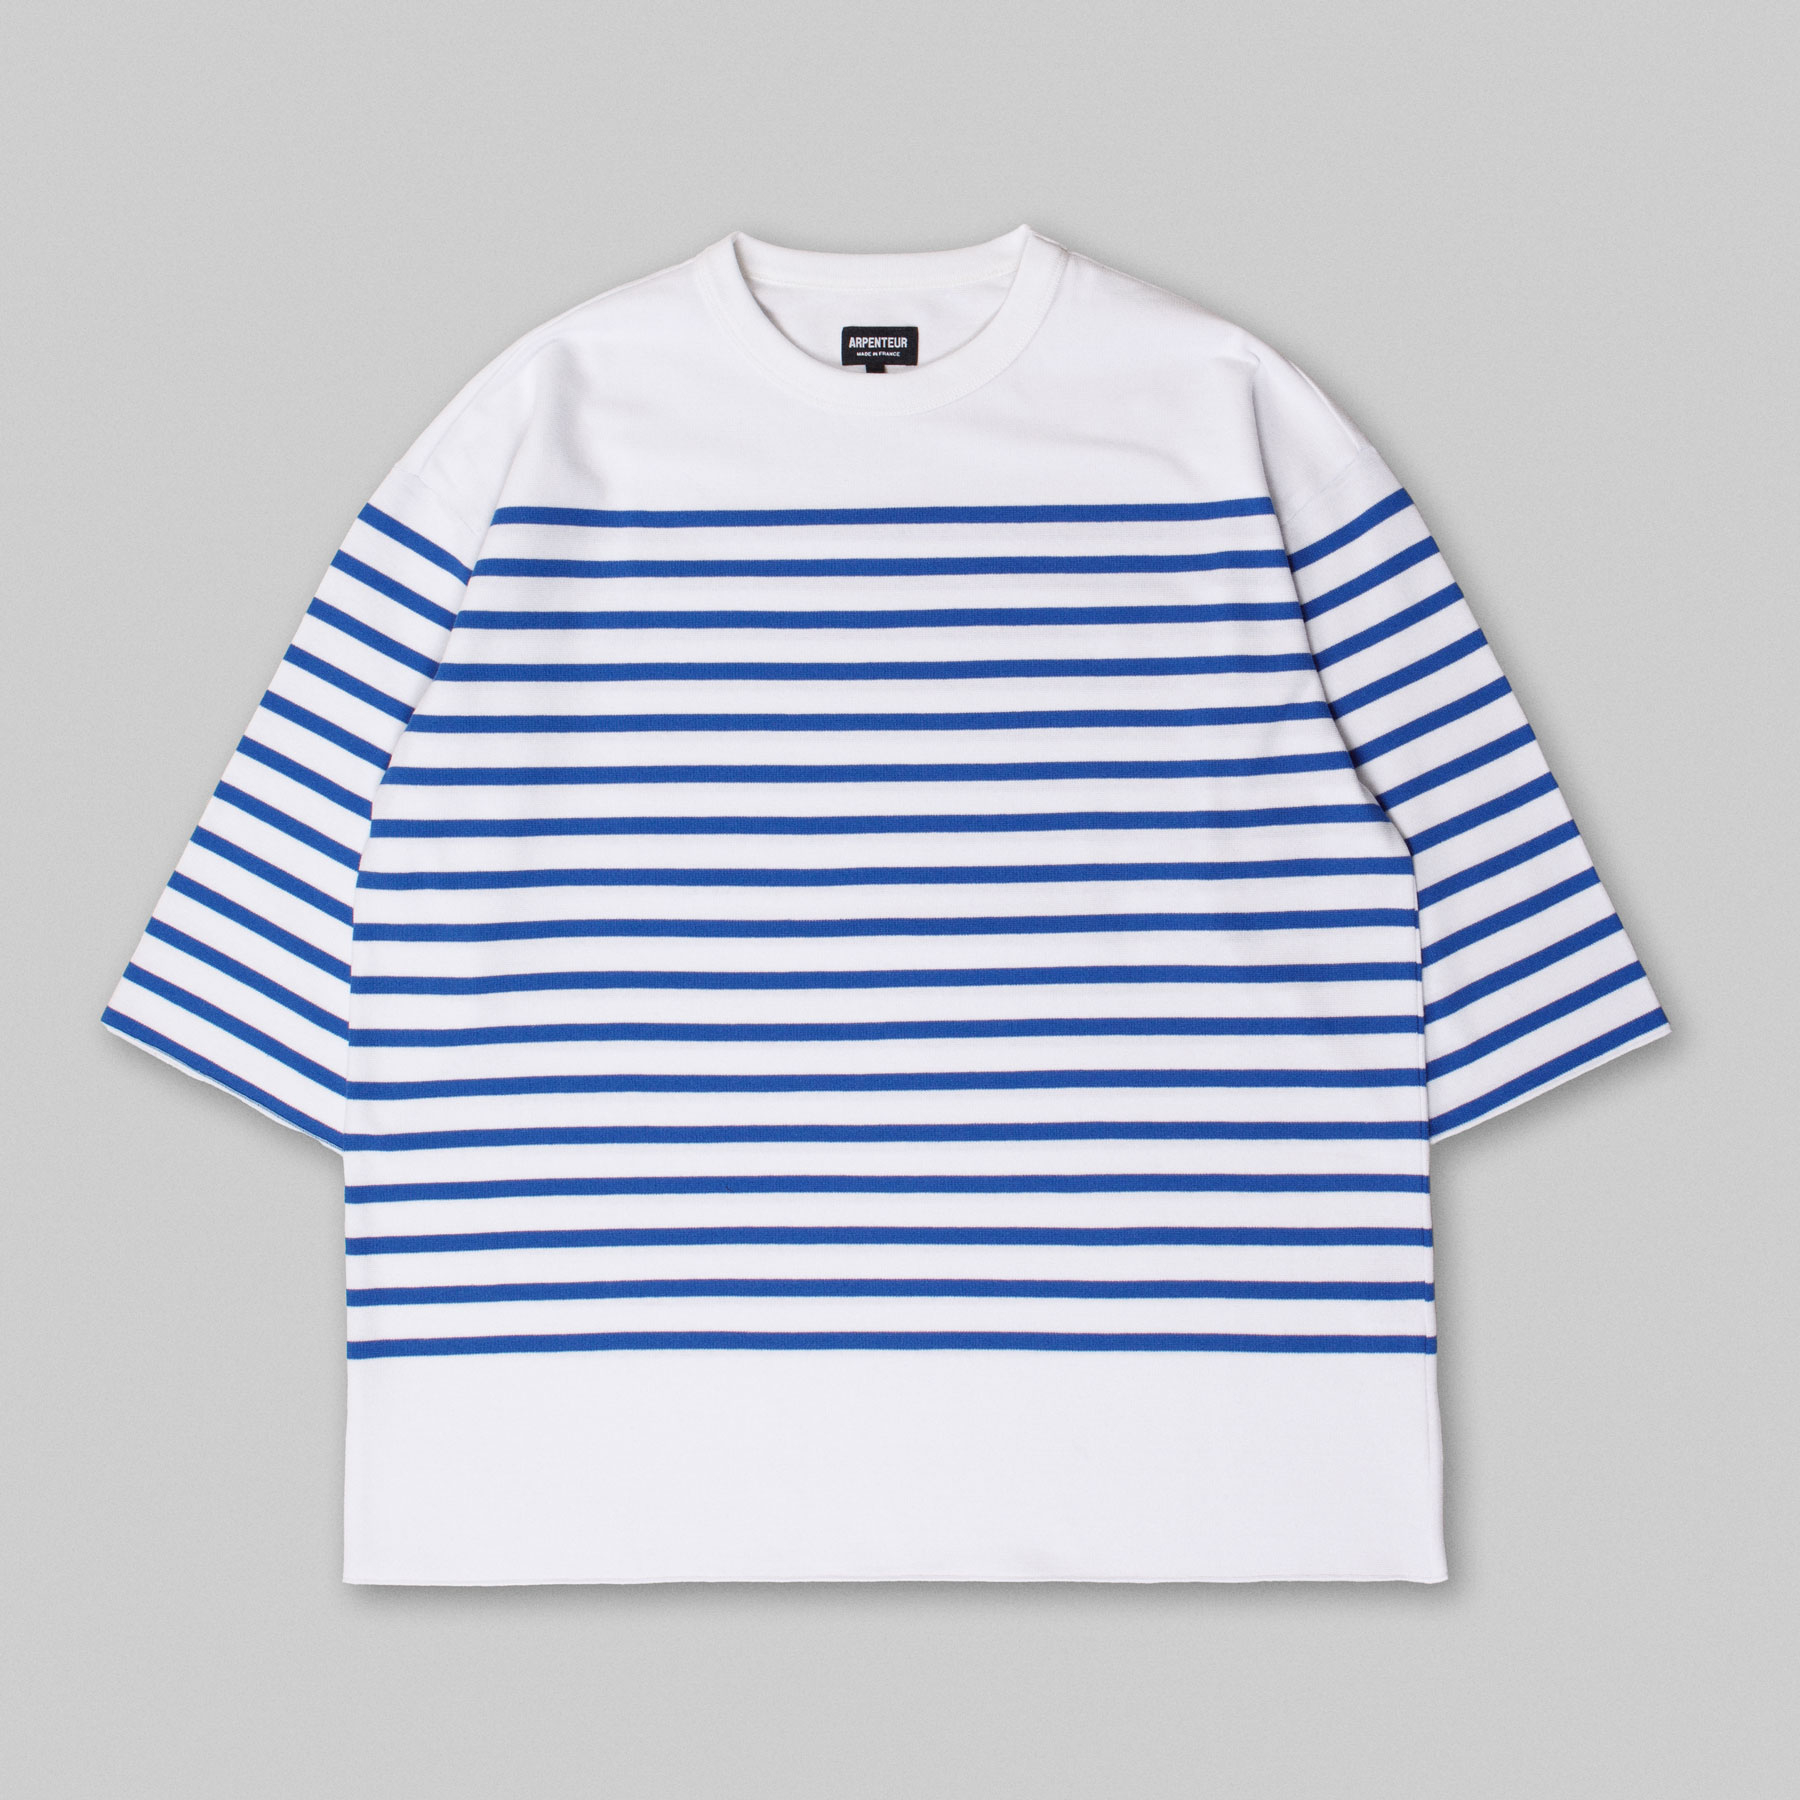 MARINIERE t-shirt by Arpenteur in White/Blue color